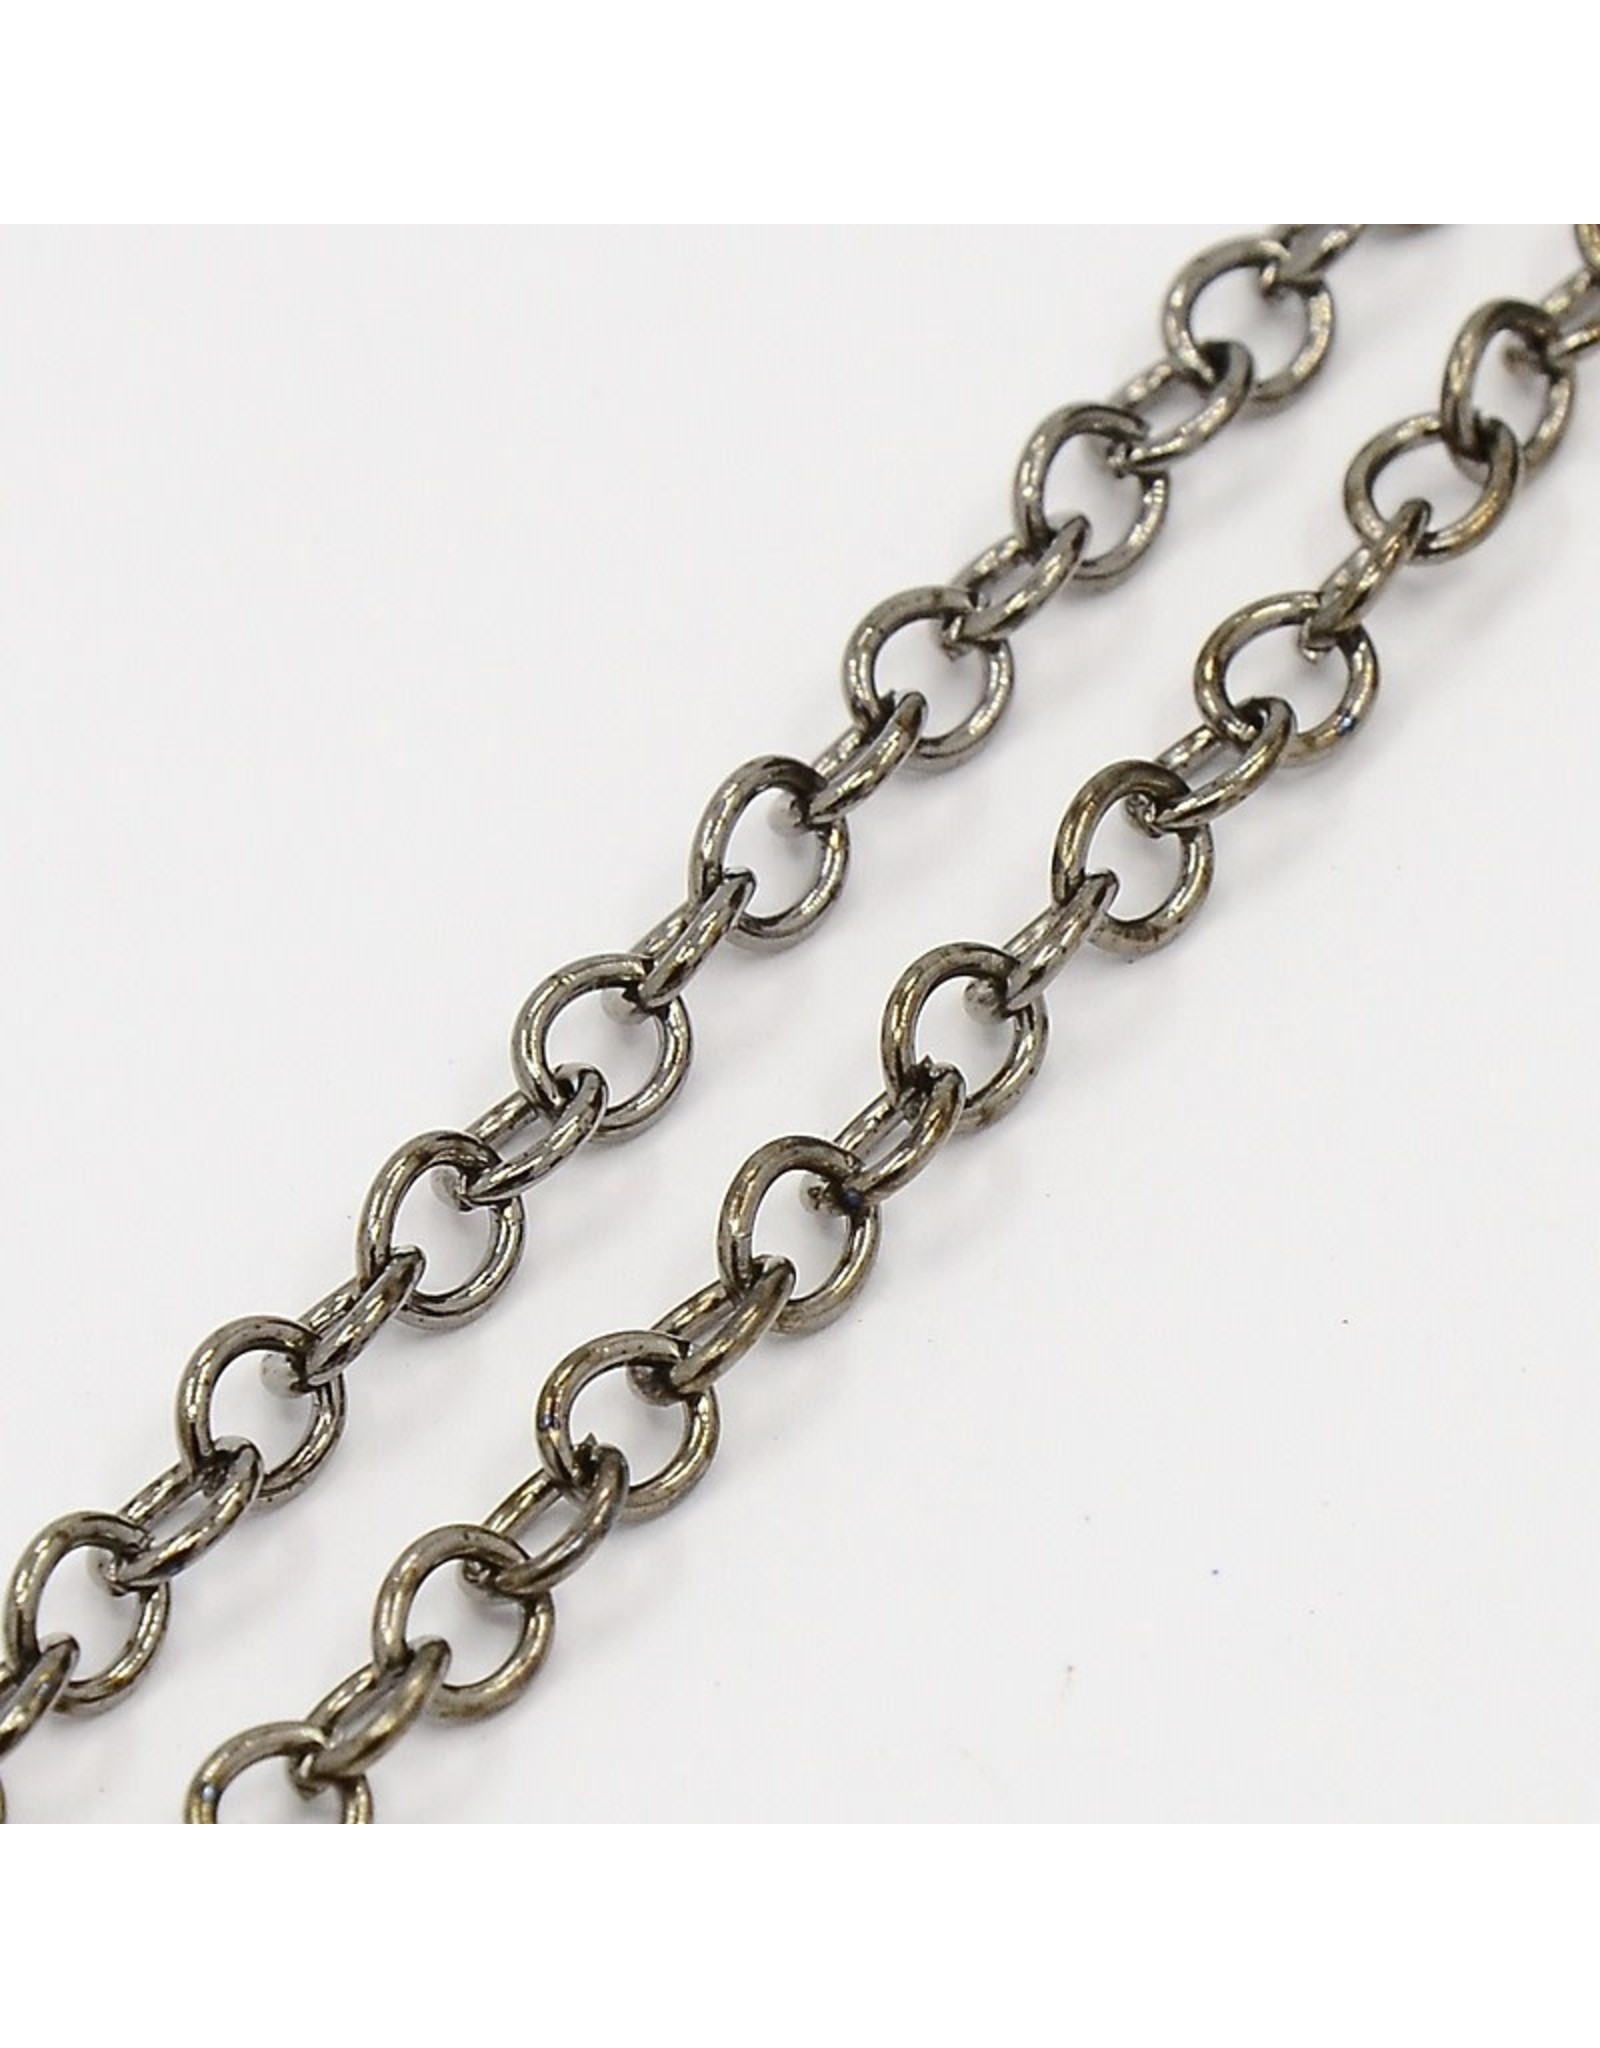 #17 Cable Chain Soldered  4x3.5mm Gunmetal  1 Foot  NF